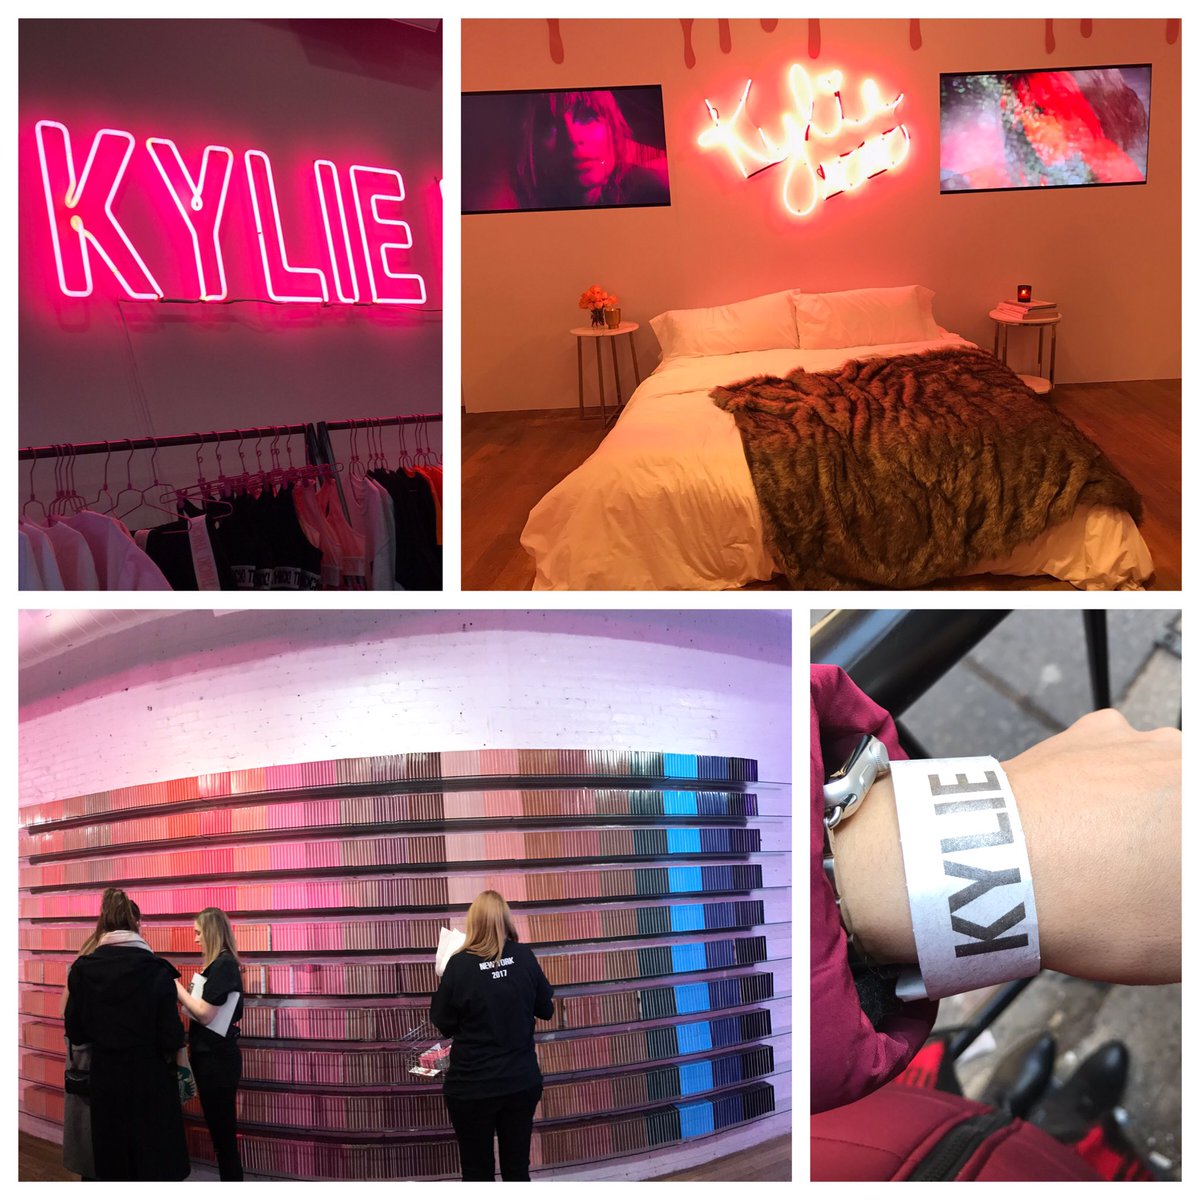 RT @s_mtz_1115: Today was perfect @thekyIieshop @KylieJenner @kyliecosmetics ♥️ best birthday ever!! https://t.co/oLQeS9SWe3